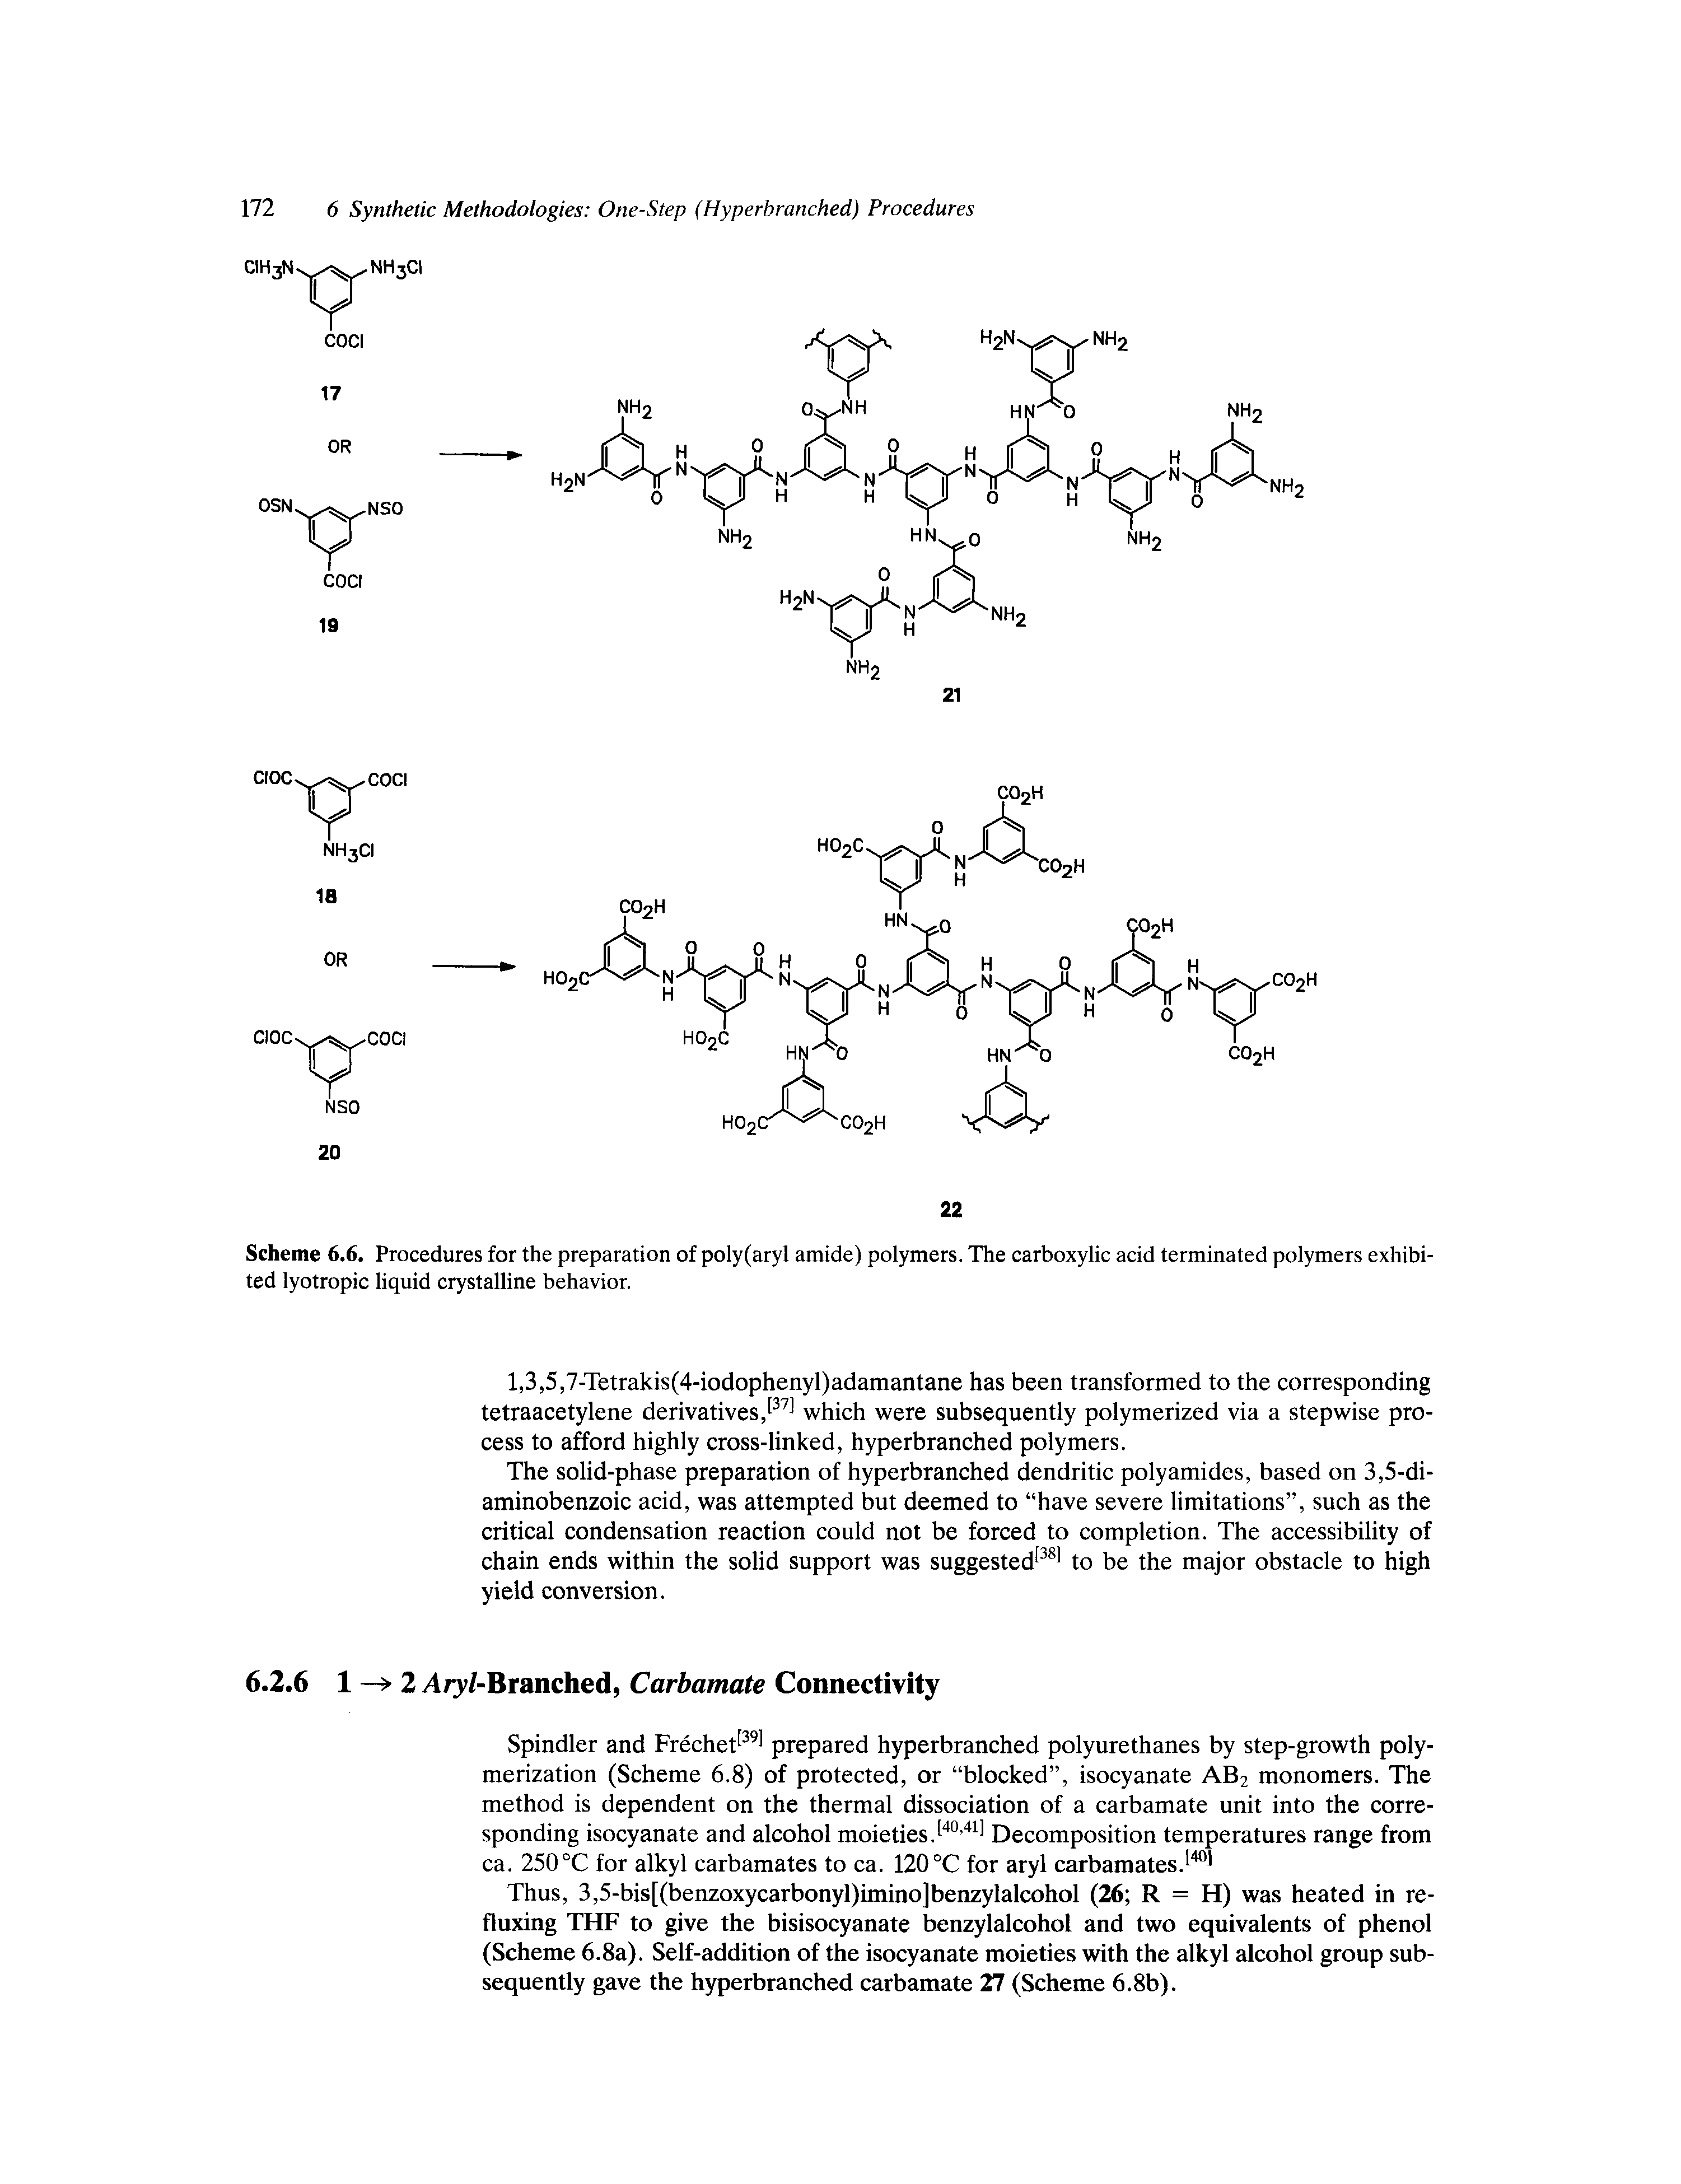 Scheme 6.6. Procedures for the preparation of poly(aryl amide) polymers. The carboxylic acid terminated polymers exhibited lyotropic liquid crystalline behavior.